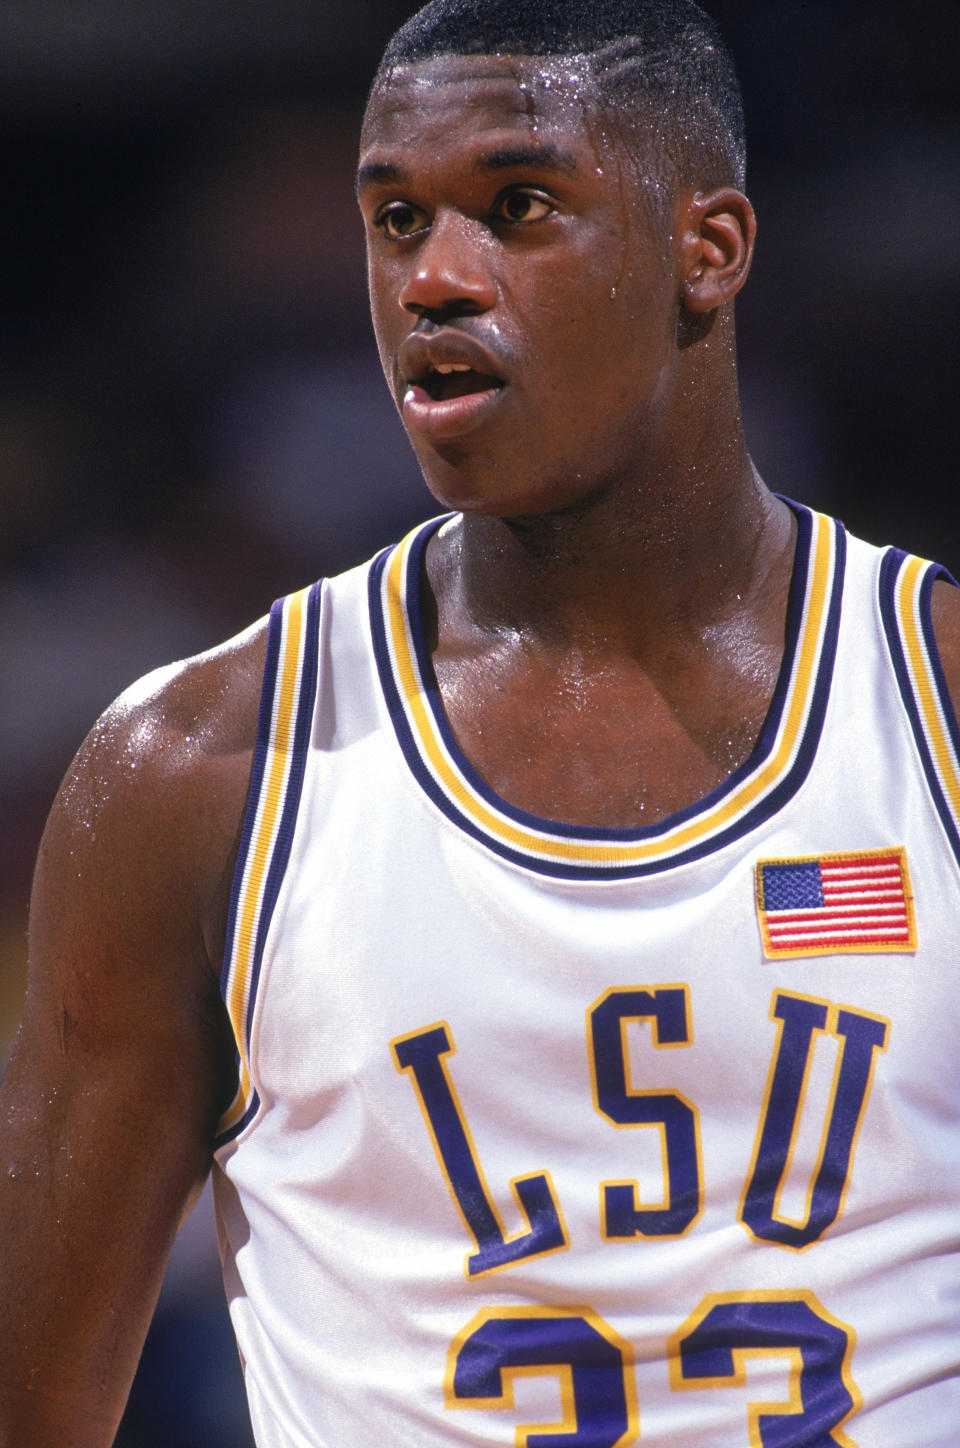 Shaquille O'Neal #33 of the Louisiana State University Tigers looks on during a NCAA game in 1992 at Pete Maravich Assembly Center in Baton Rouge, Louisiana. (Photo by Getty Images)